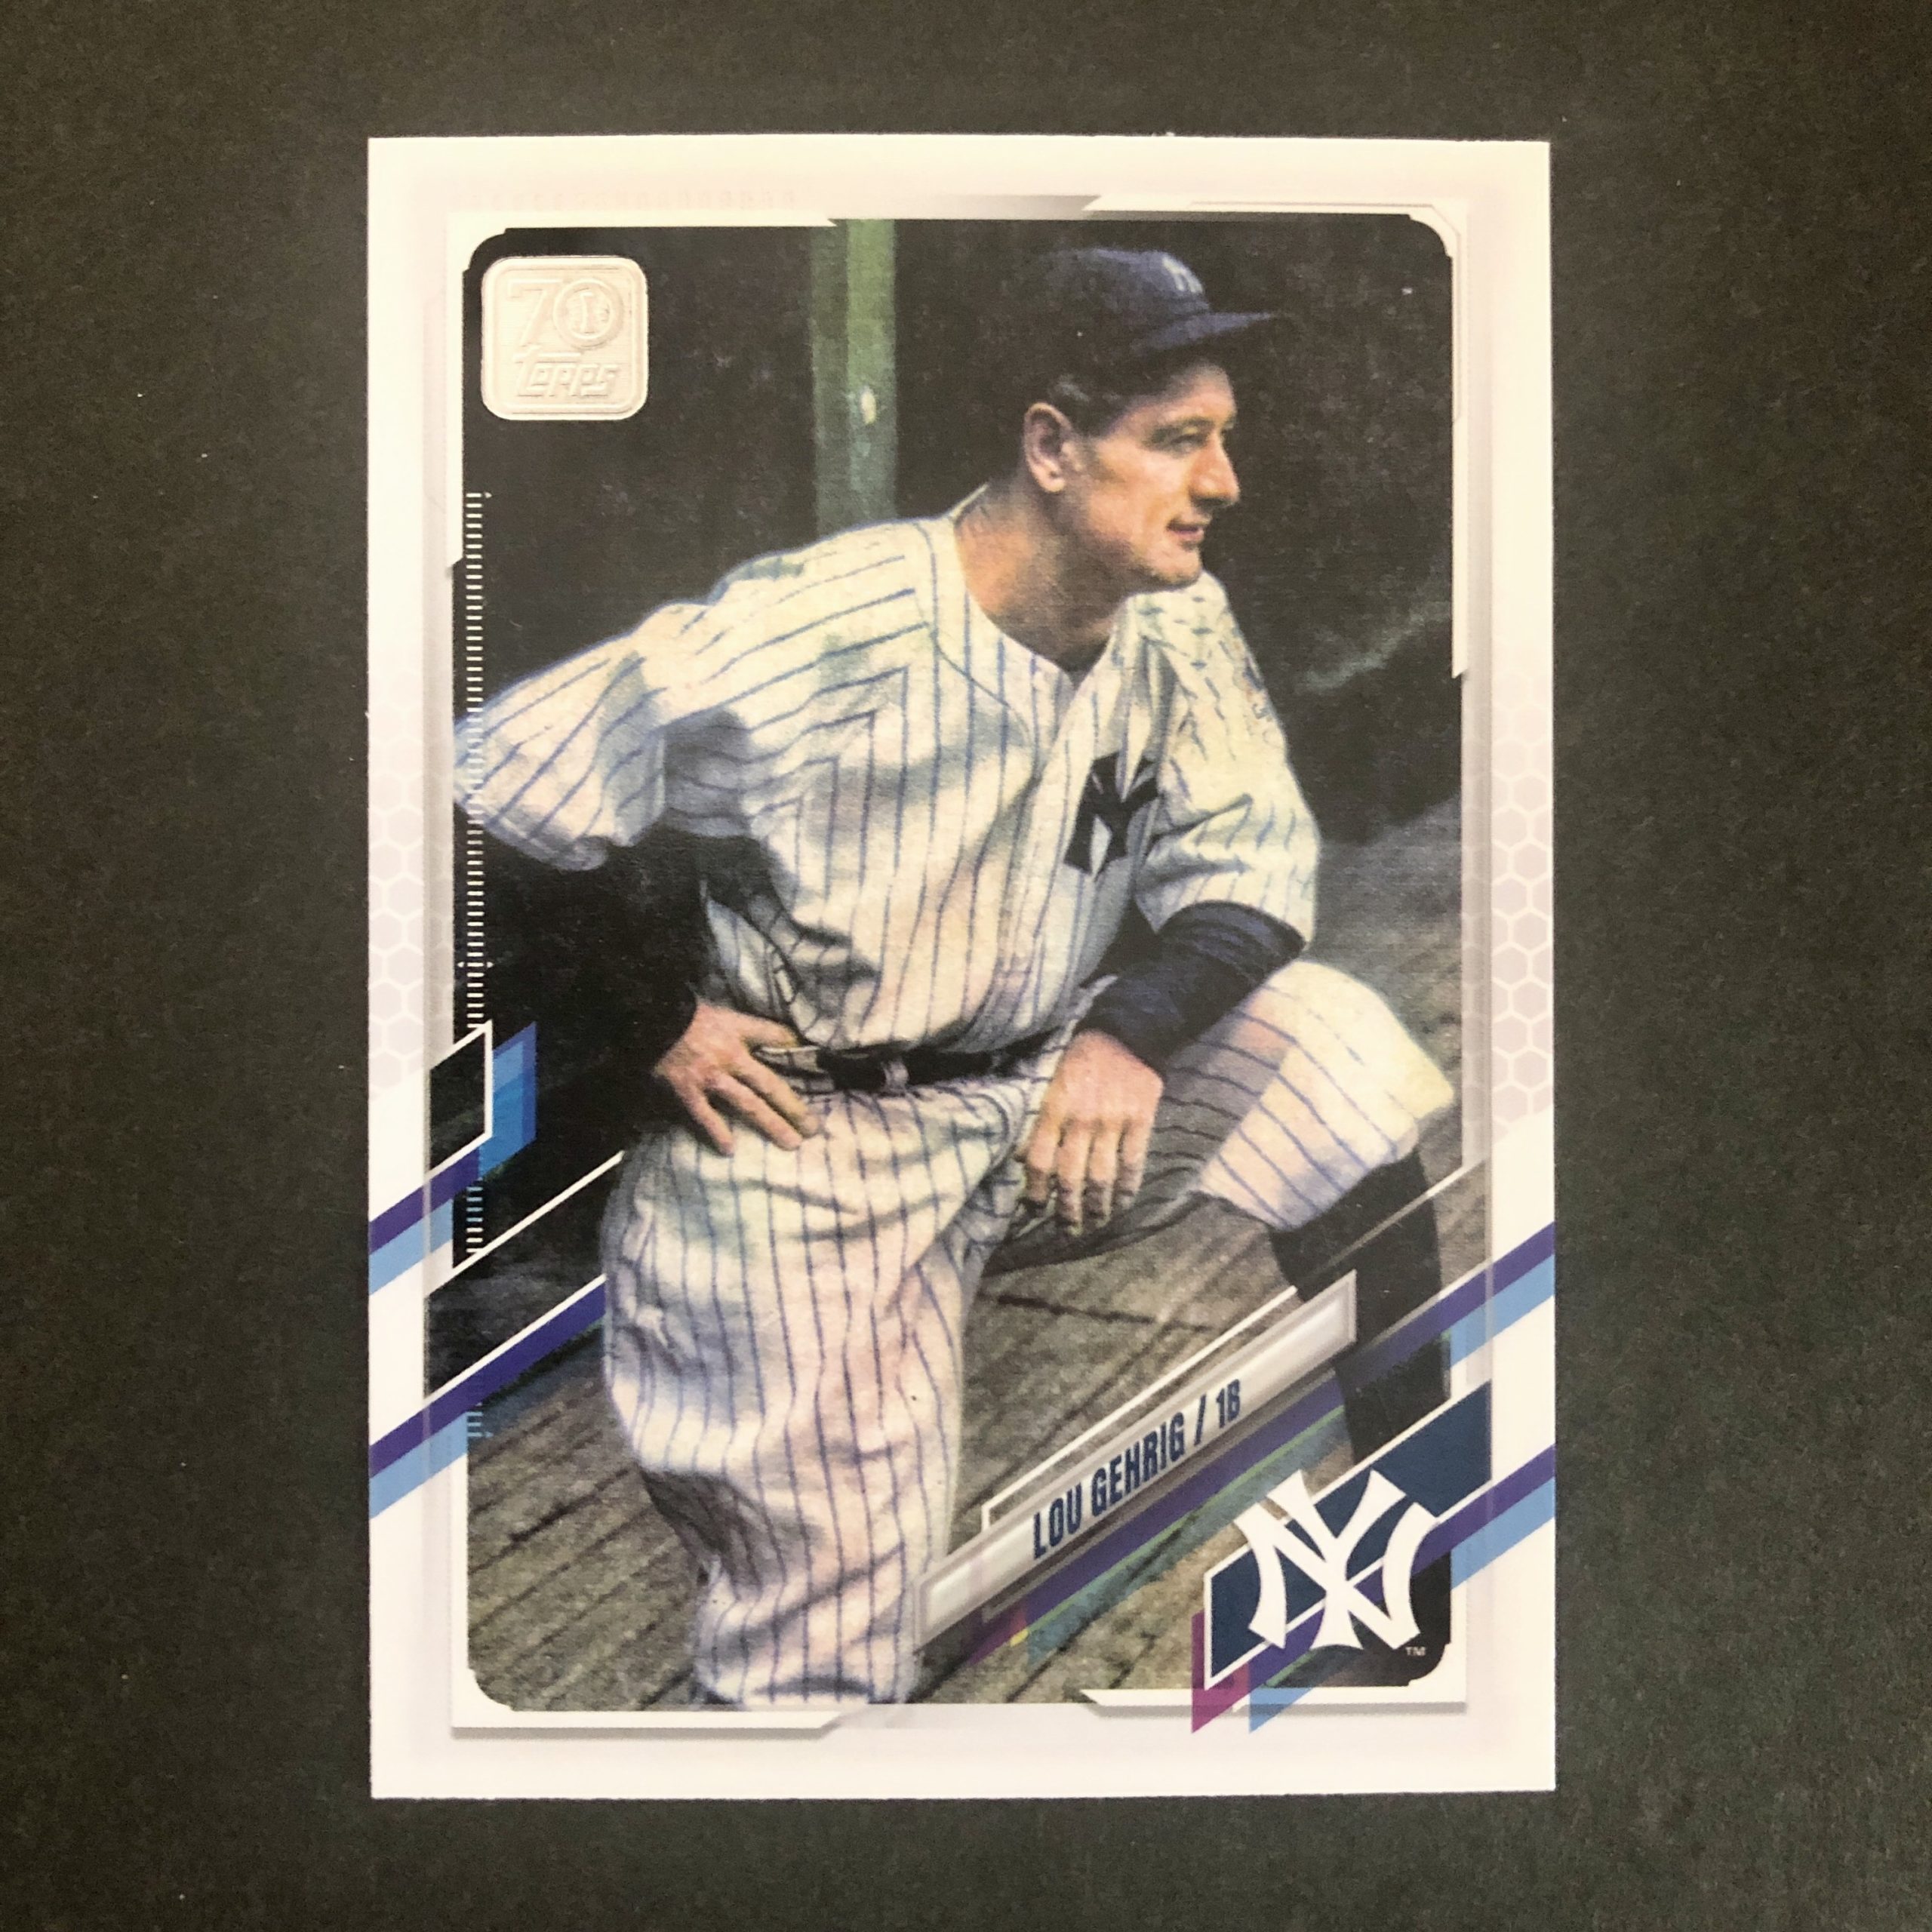 Lou Gehrig 2021 Topps Update SP Card